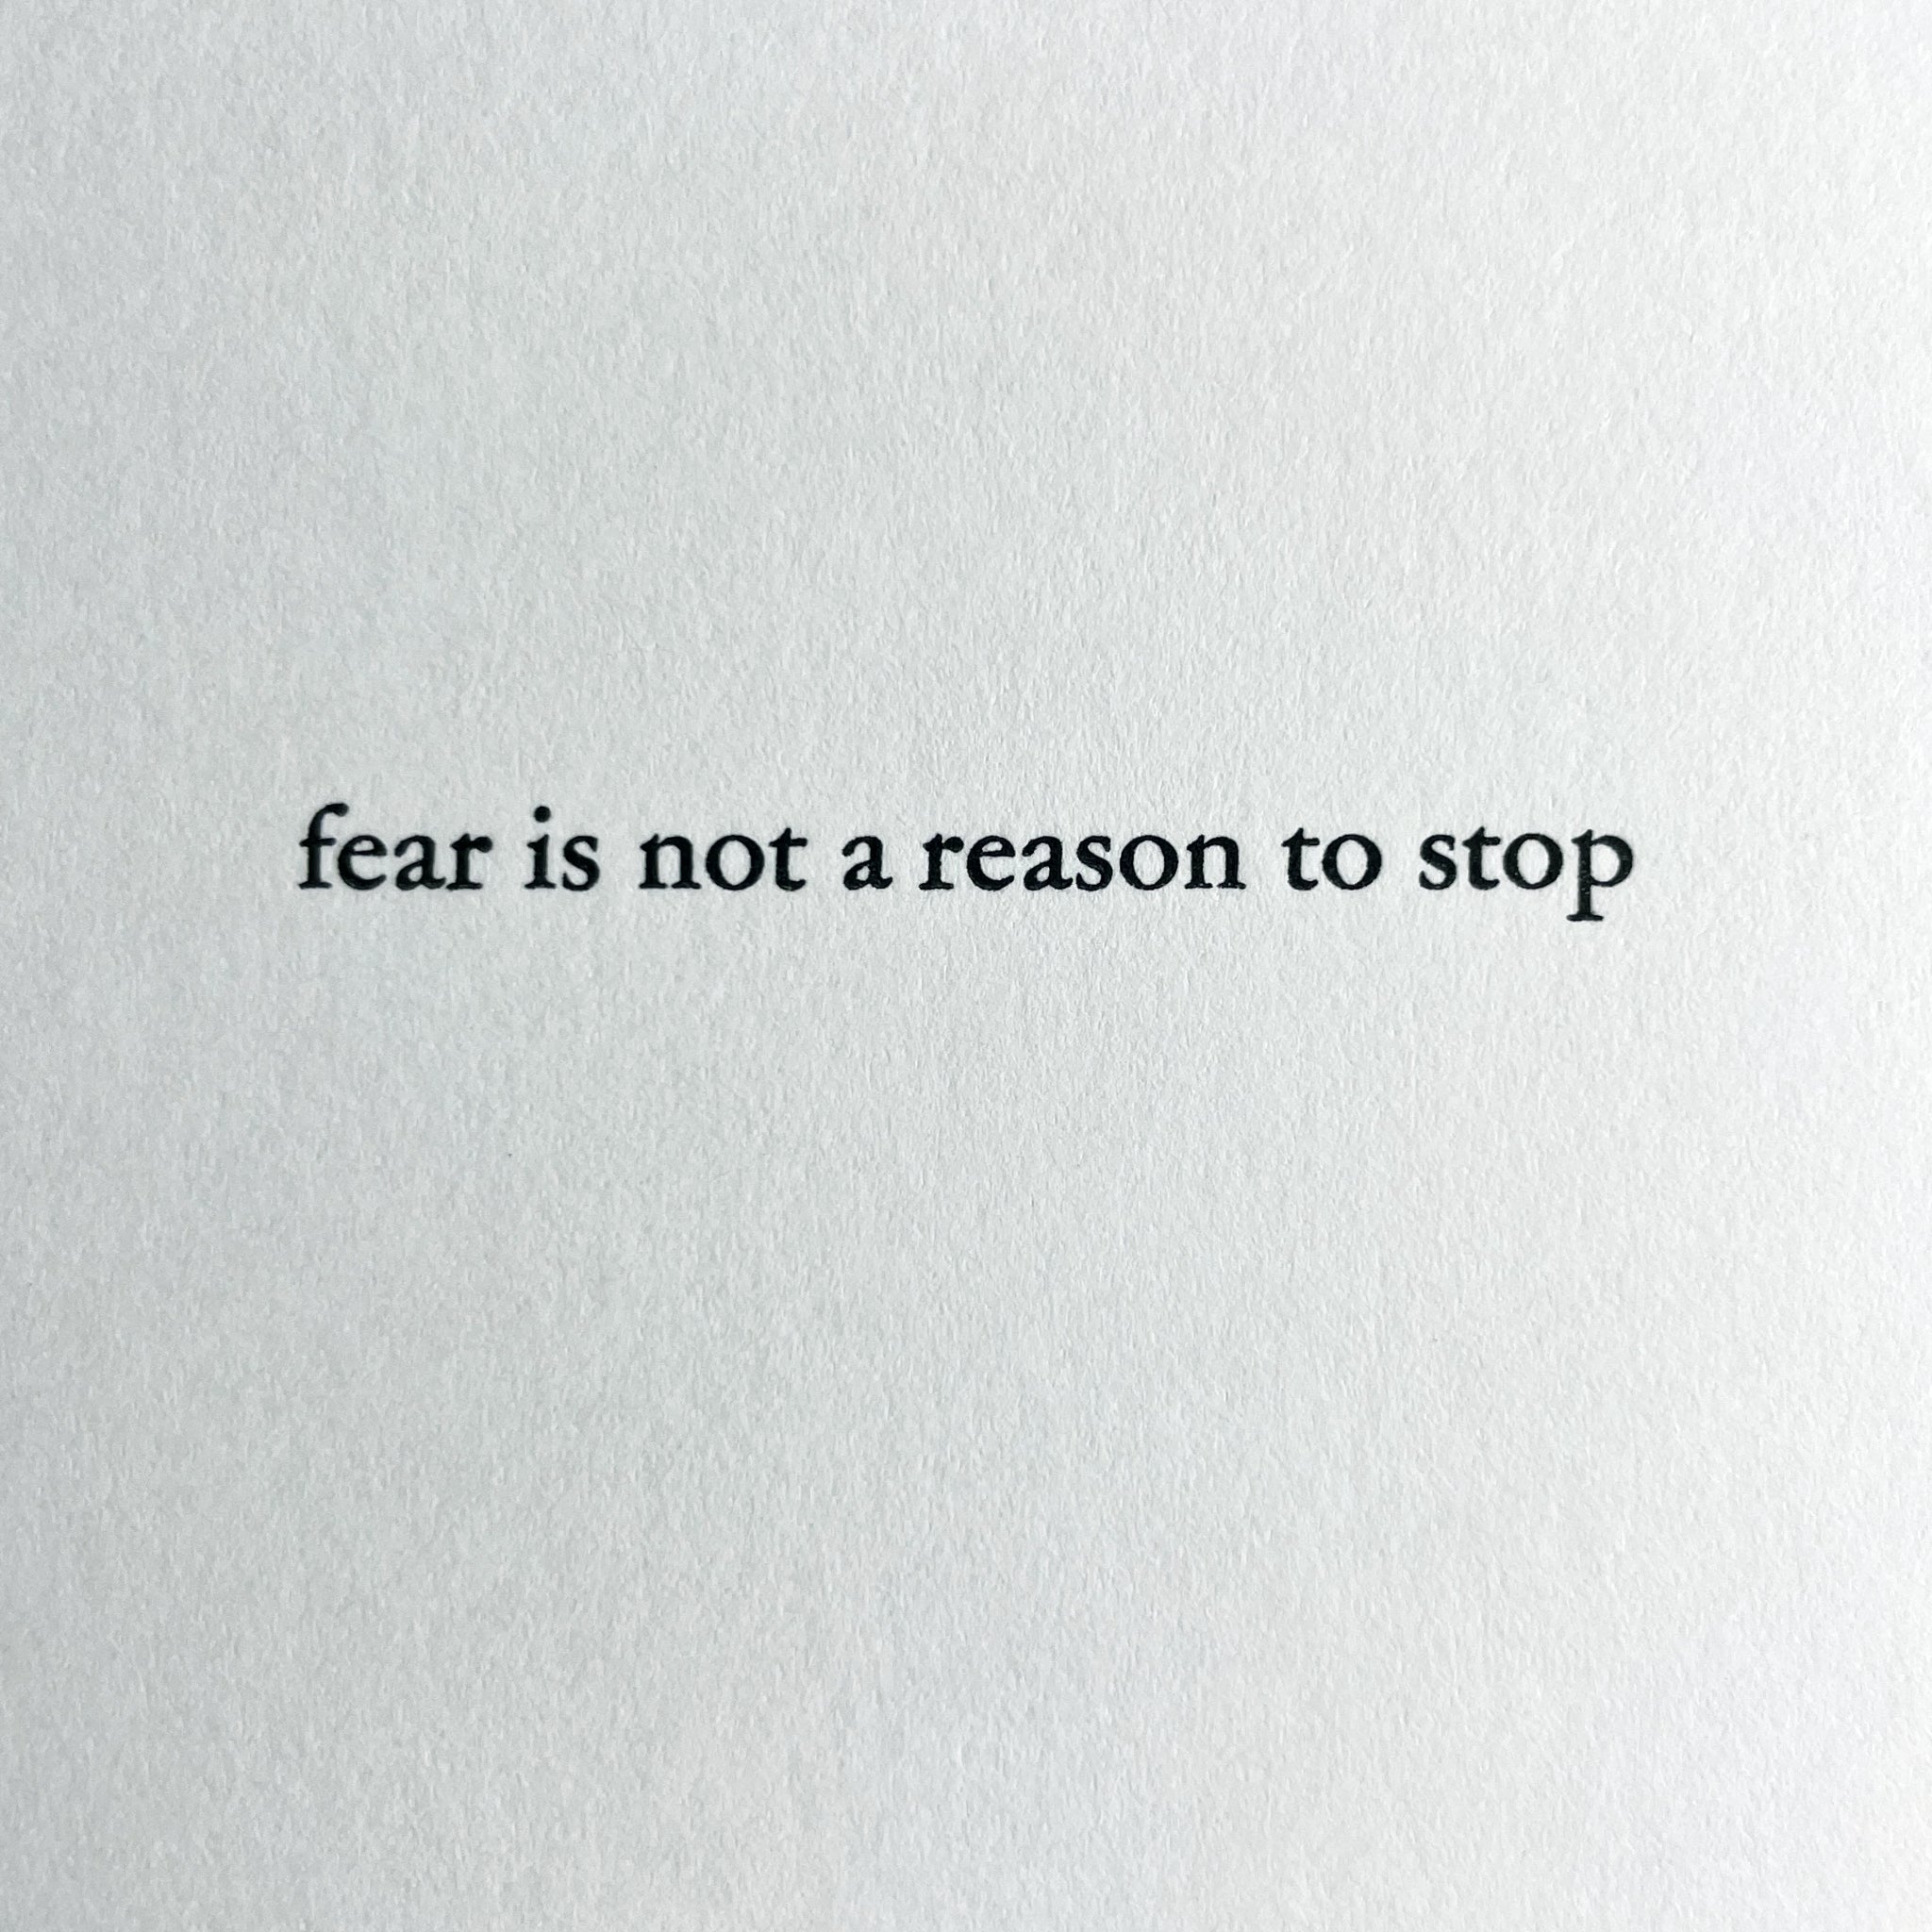 fear is not a reason to stop